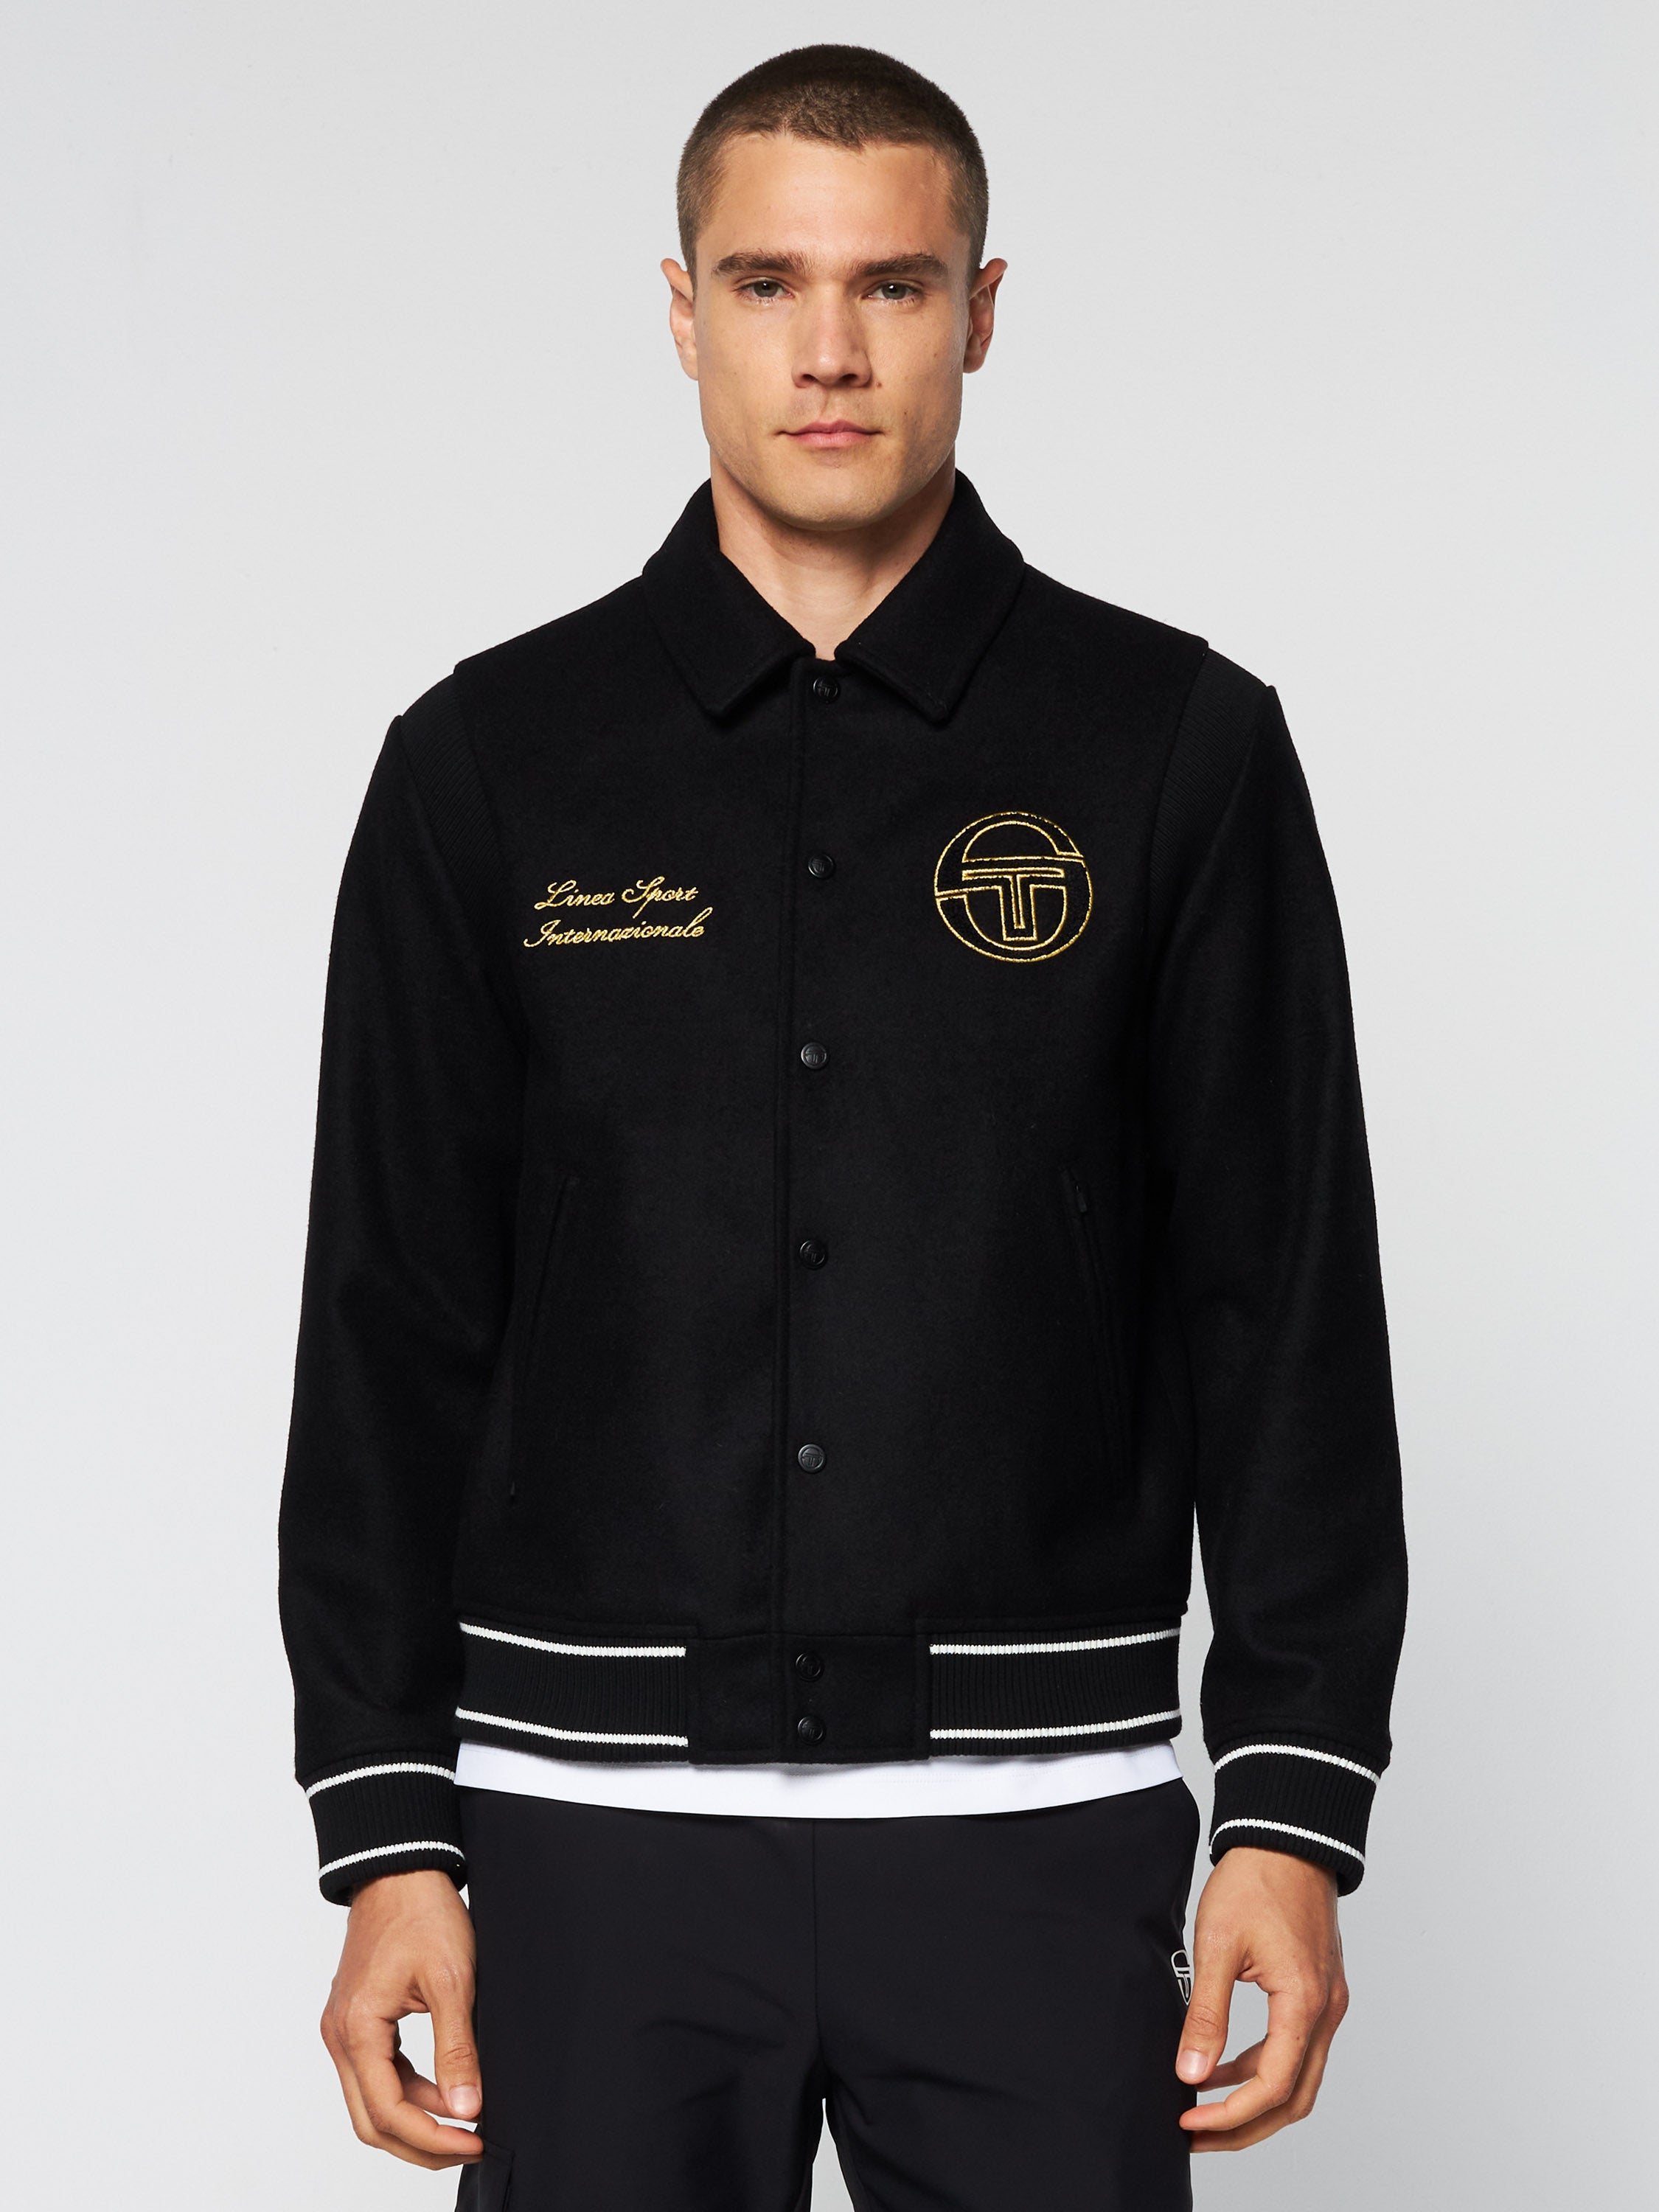 Track Jackets & Track Tops - Official Sergio Tacchini